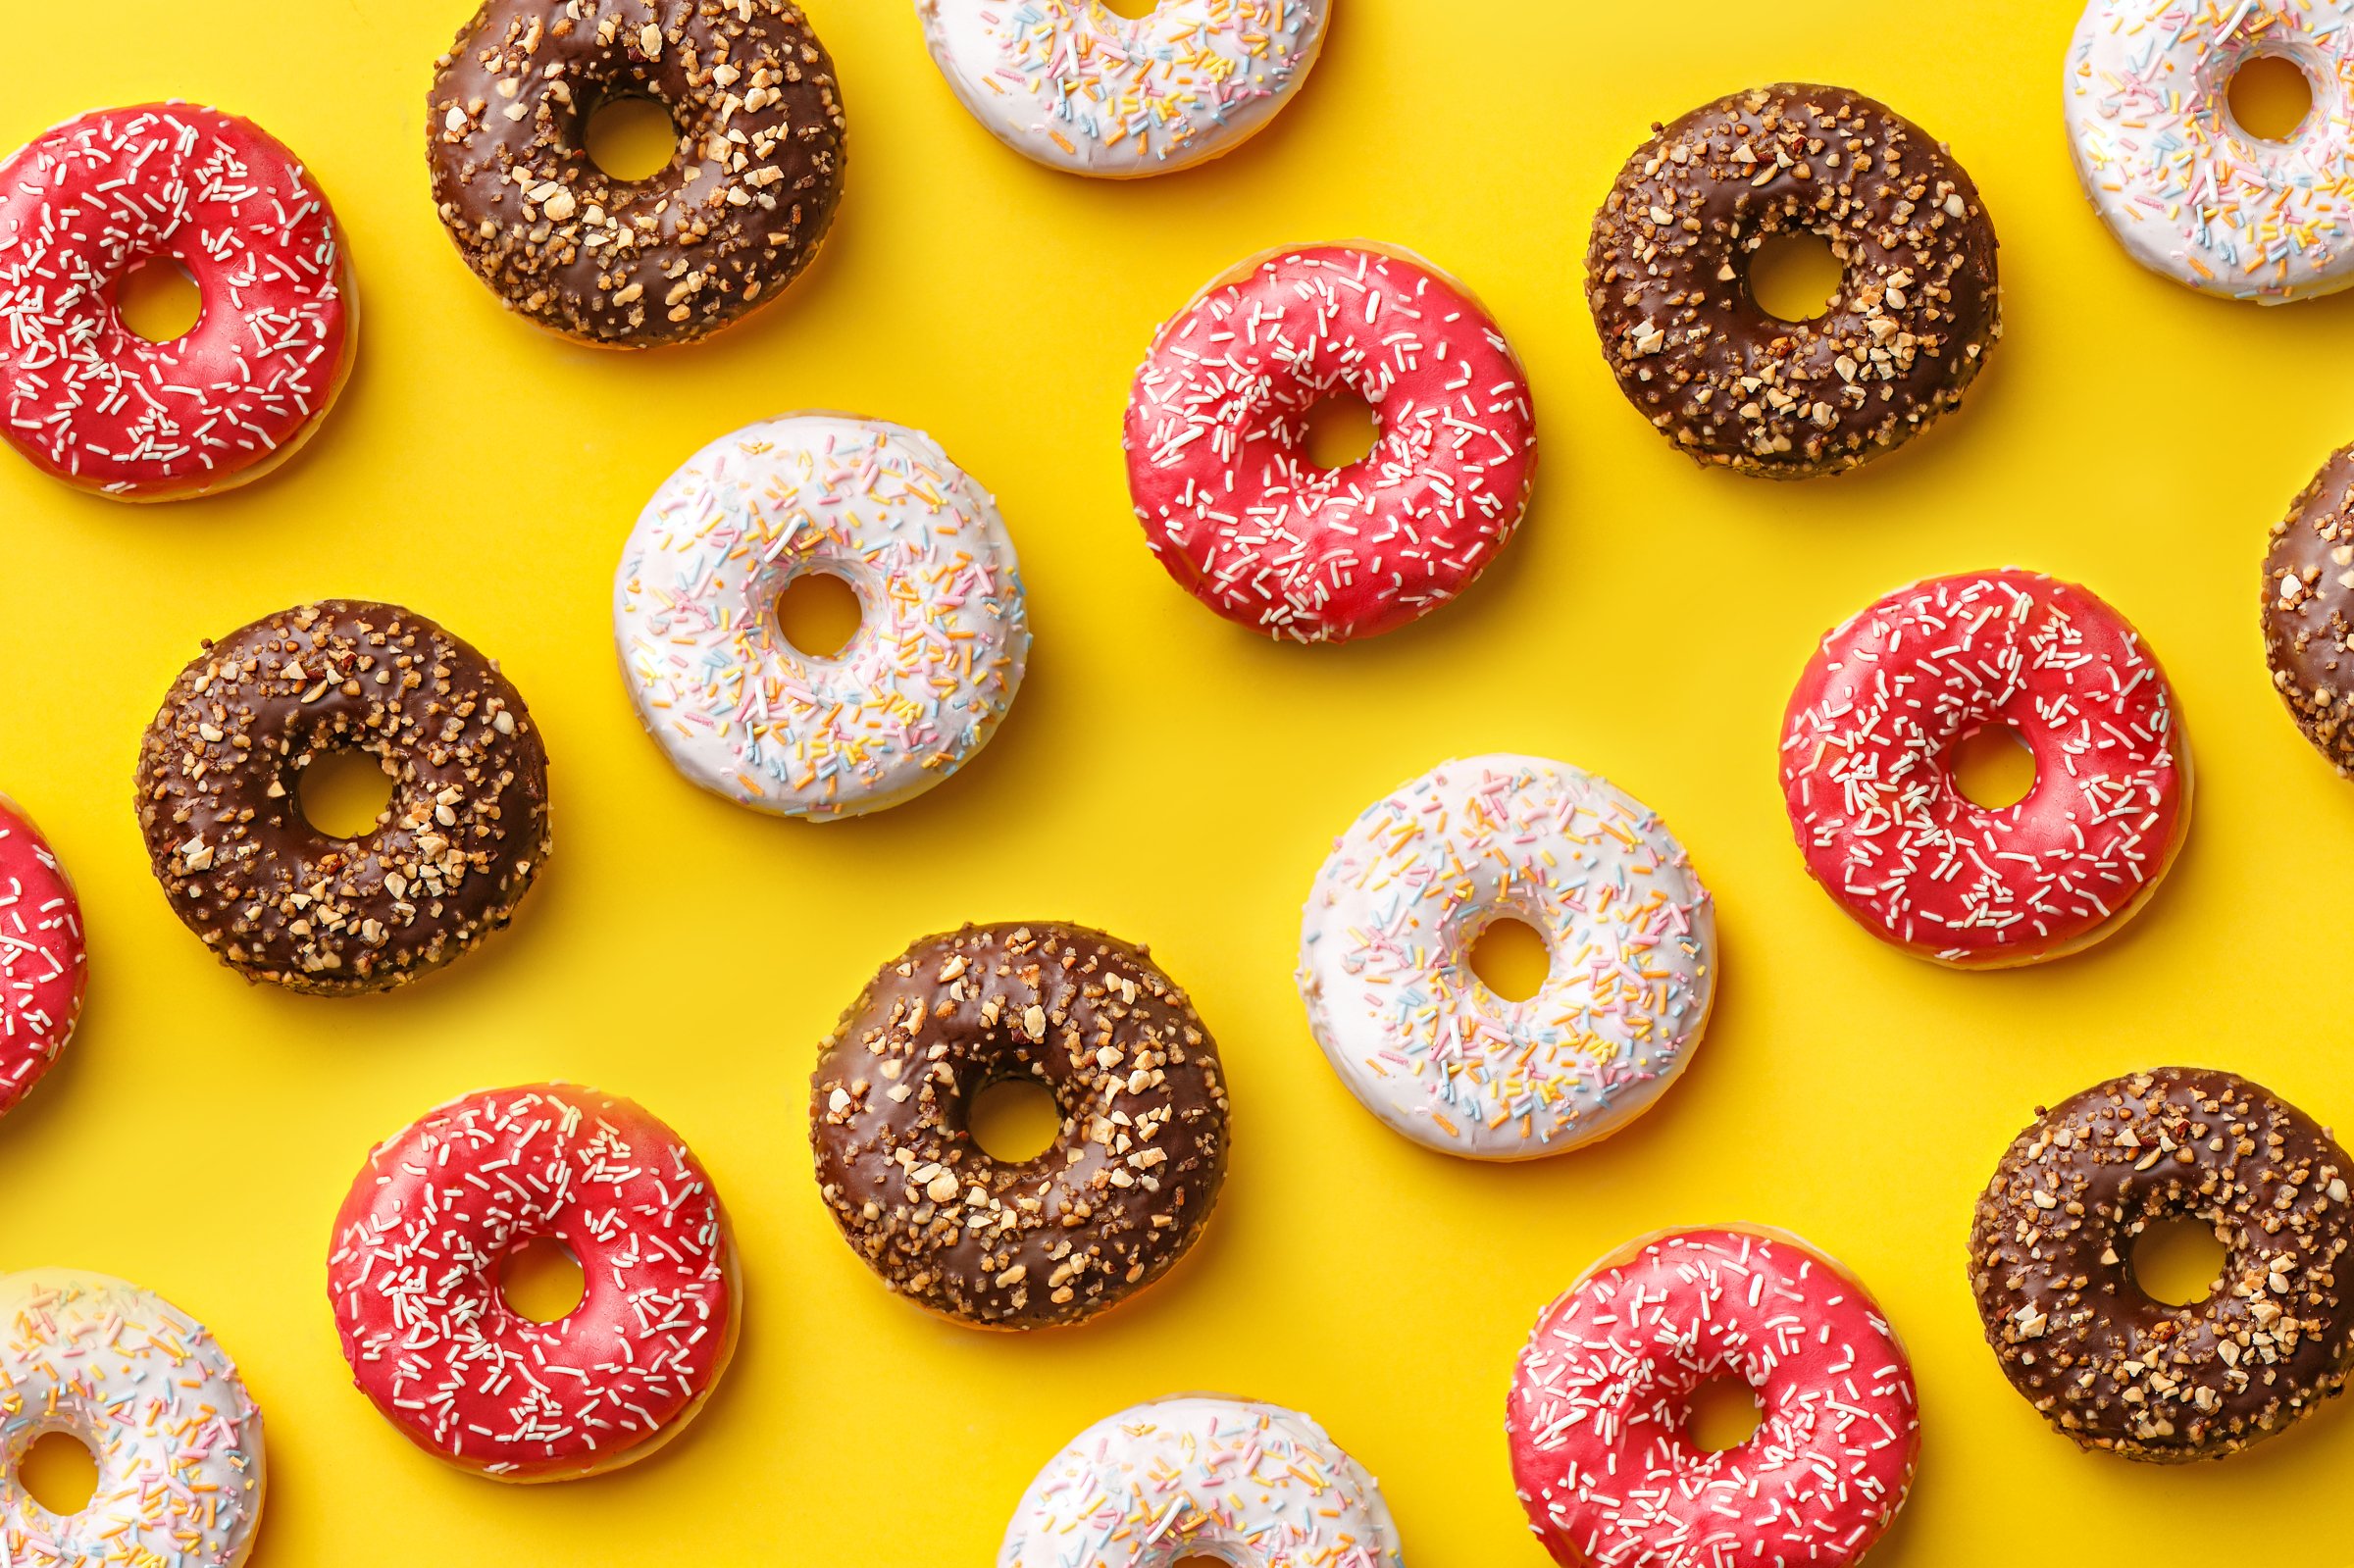 Flat lay donuts pattern on a yellow background. Top view